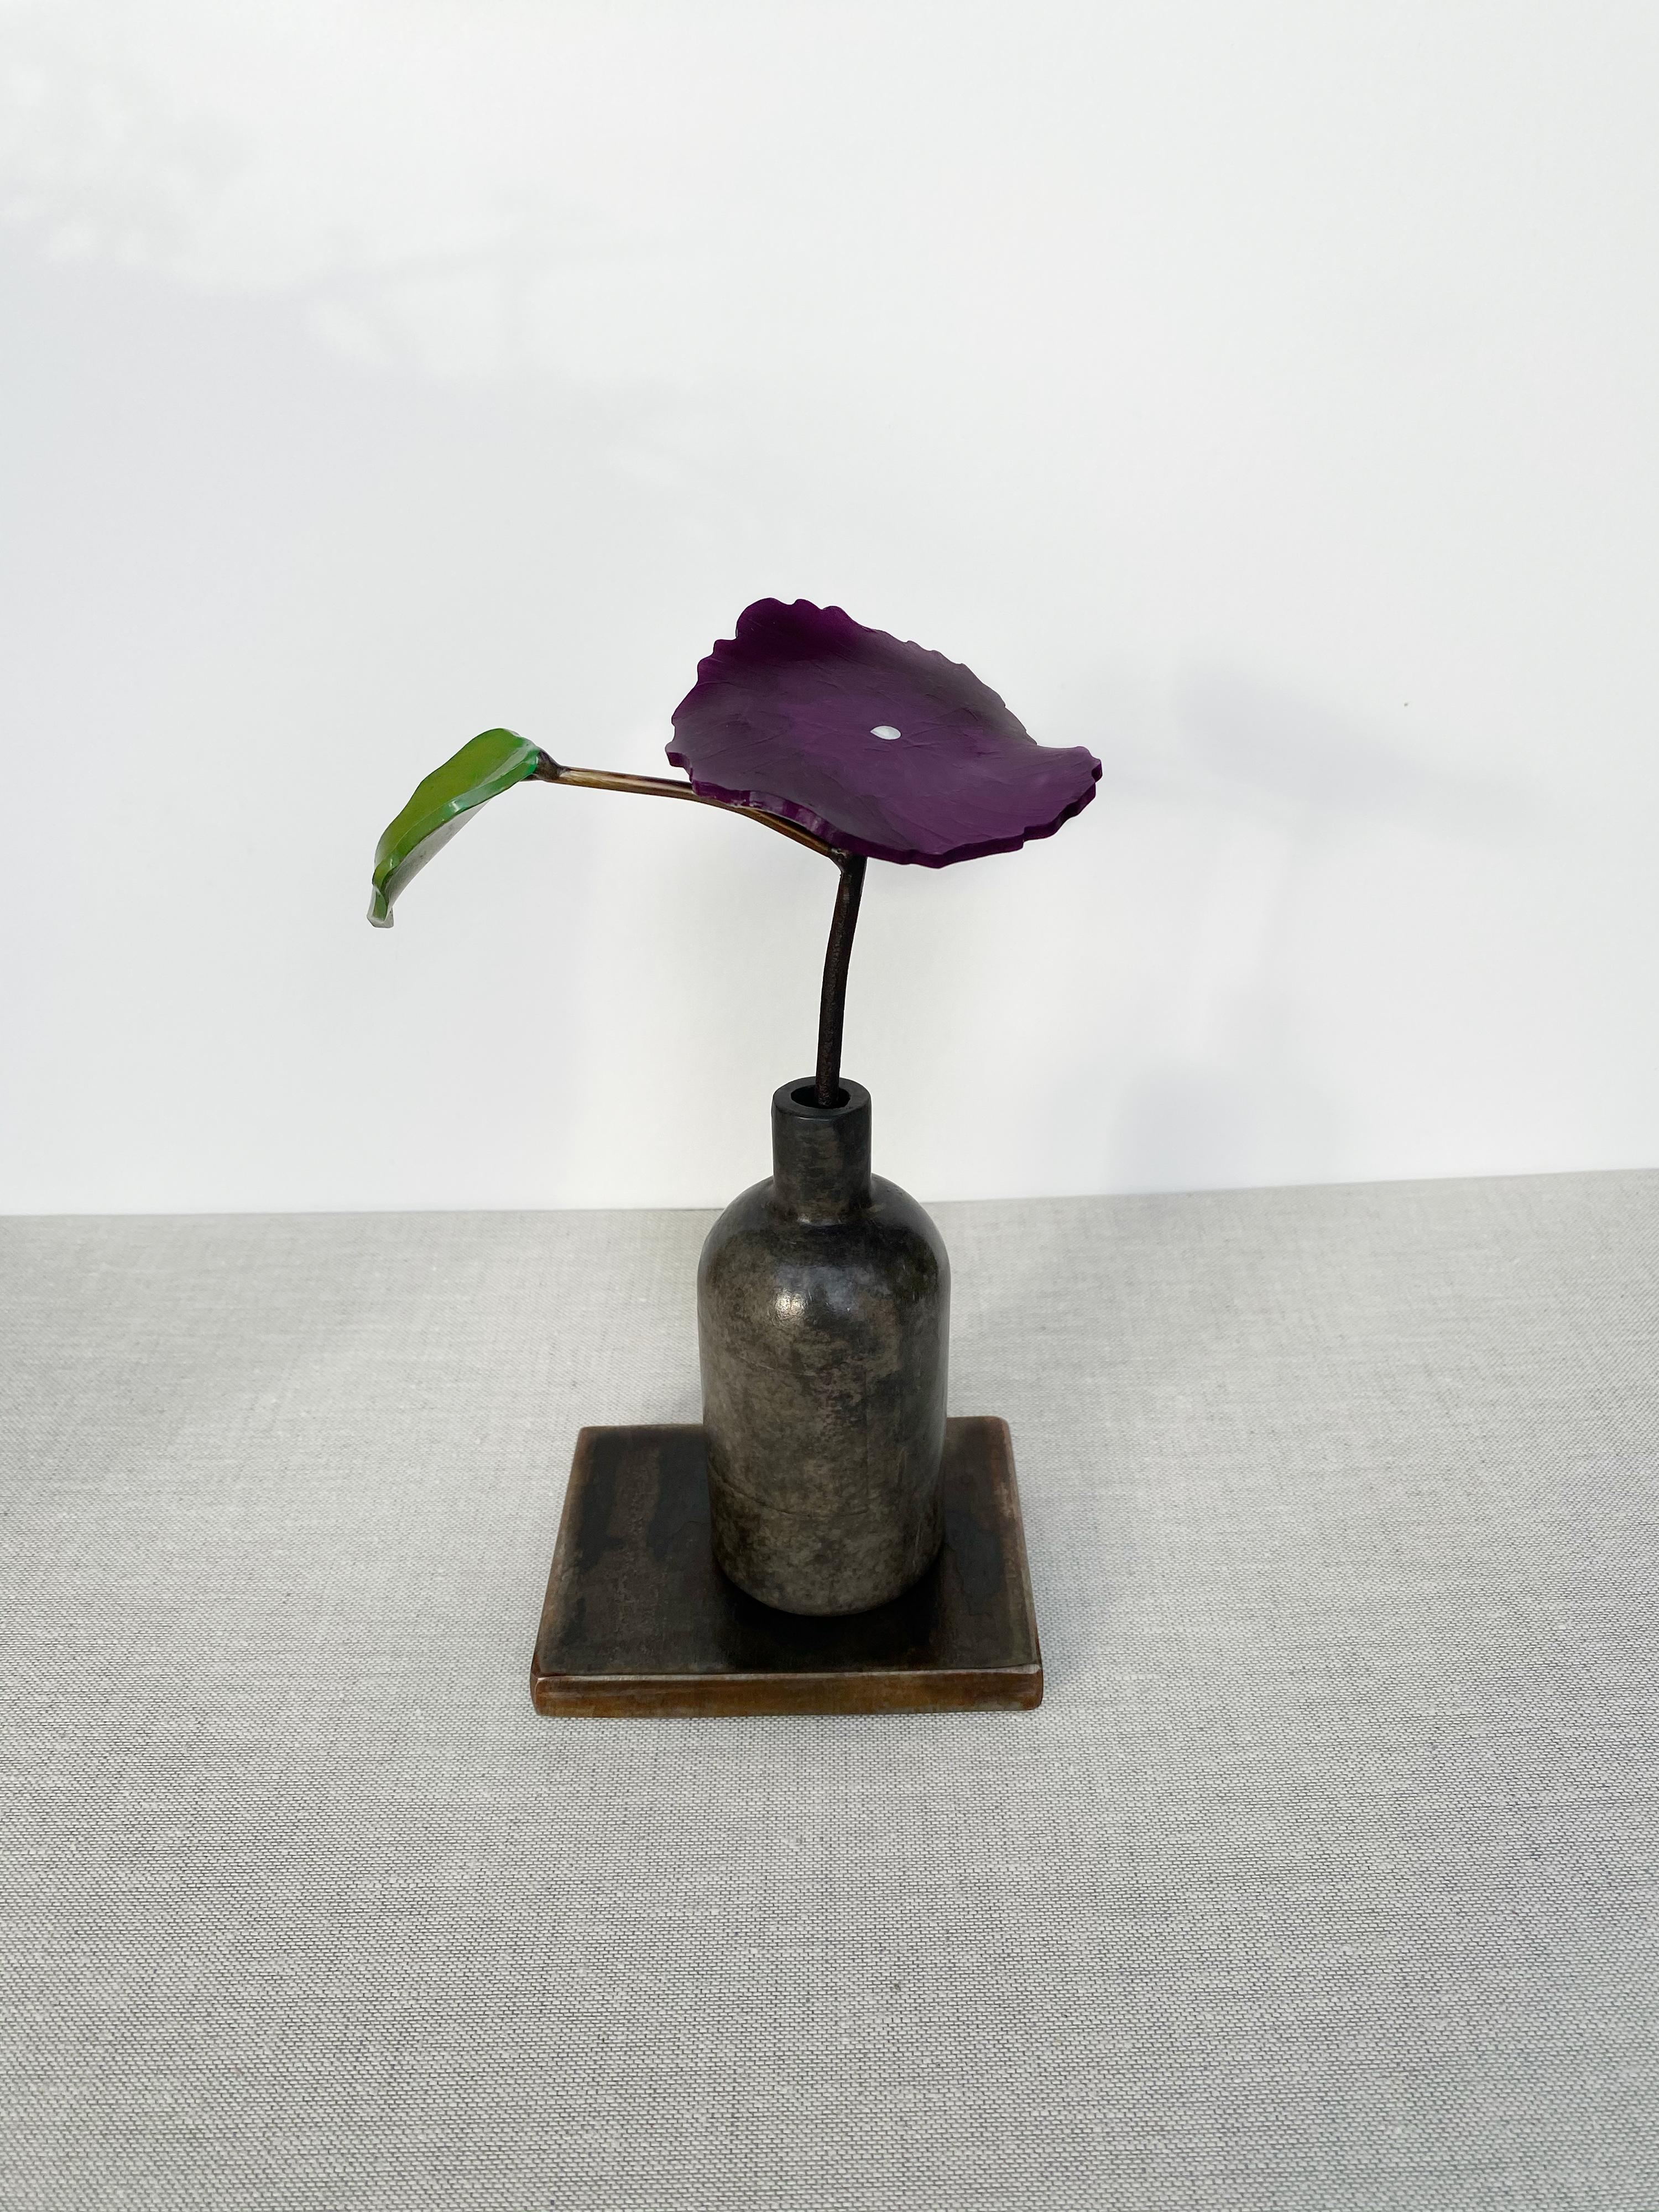 'Morning Glory' by David Kimball Anderson, 2020. Bronze, steel, and paint, 8 x 4 x 3 in. This sculpture features a round vase cast in bronze and finished in varying patinas of light and dark gray. The flower is in a bright color of purple and one